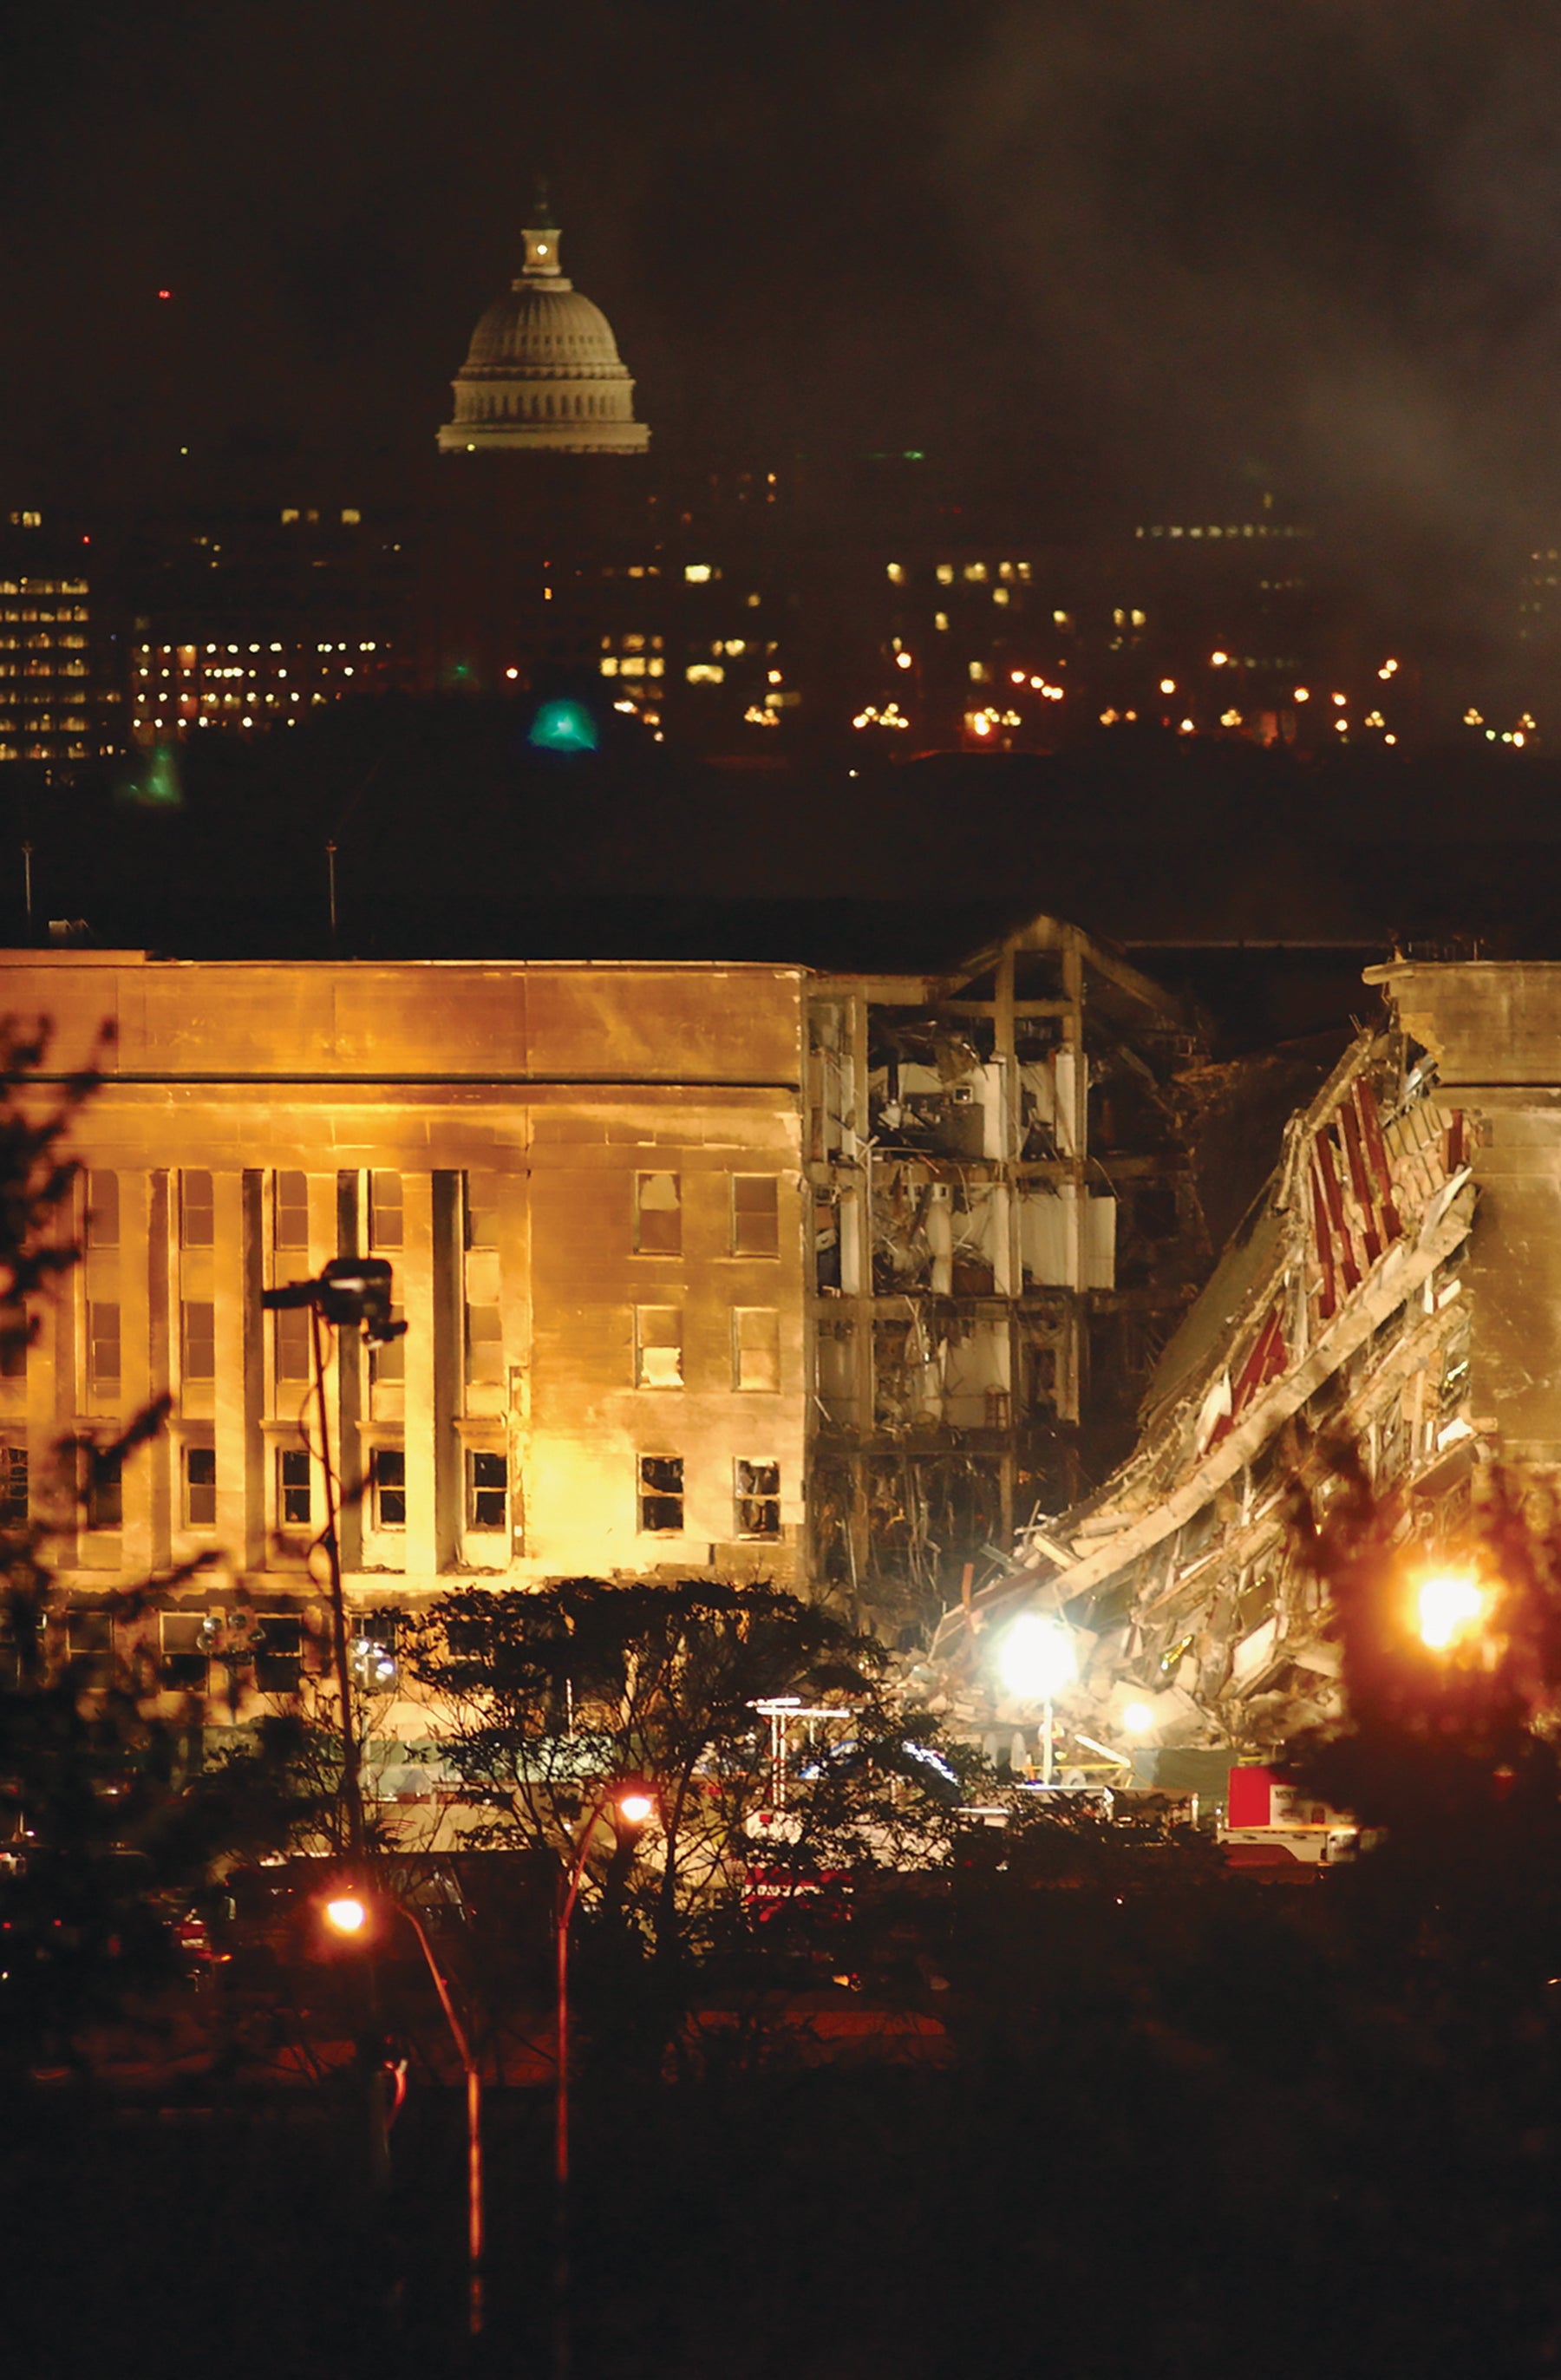 At the Pentagon, firefighters battle smoke and flames and search for survivors late into the night of Sept. 11, 2001, after a hijacked airliner crashed into the building.